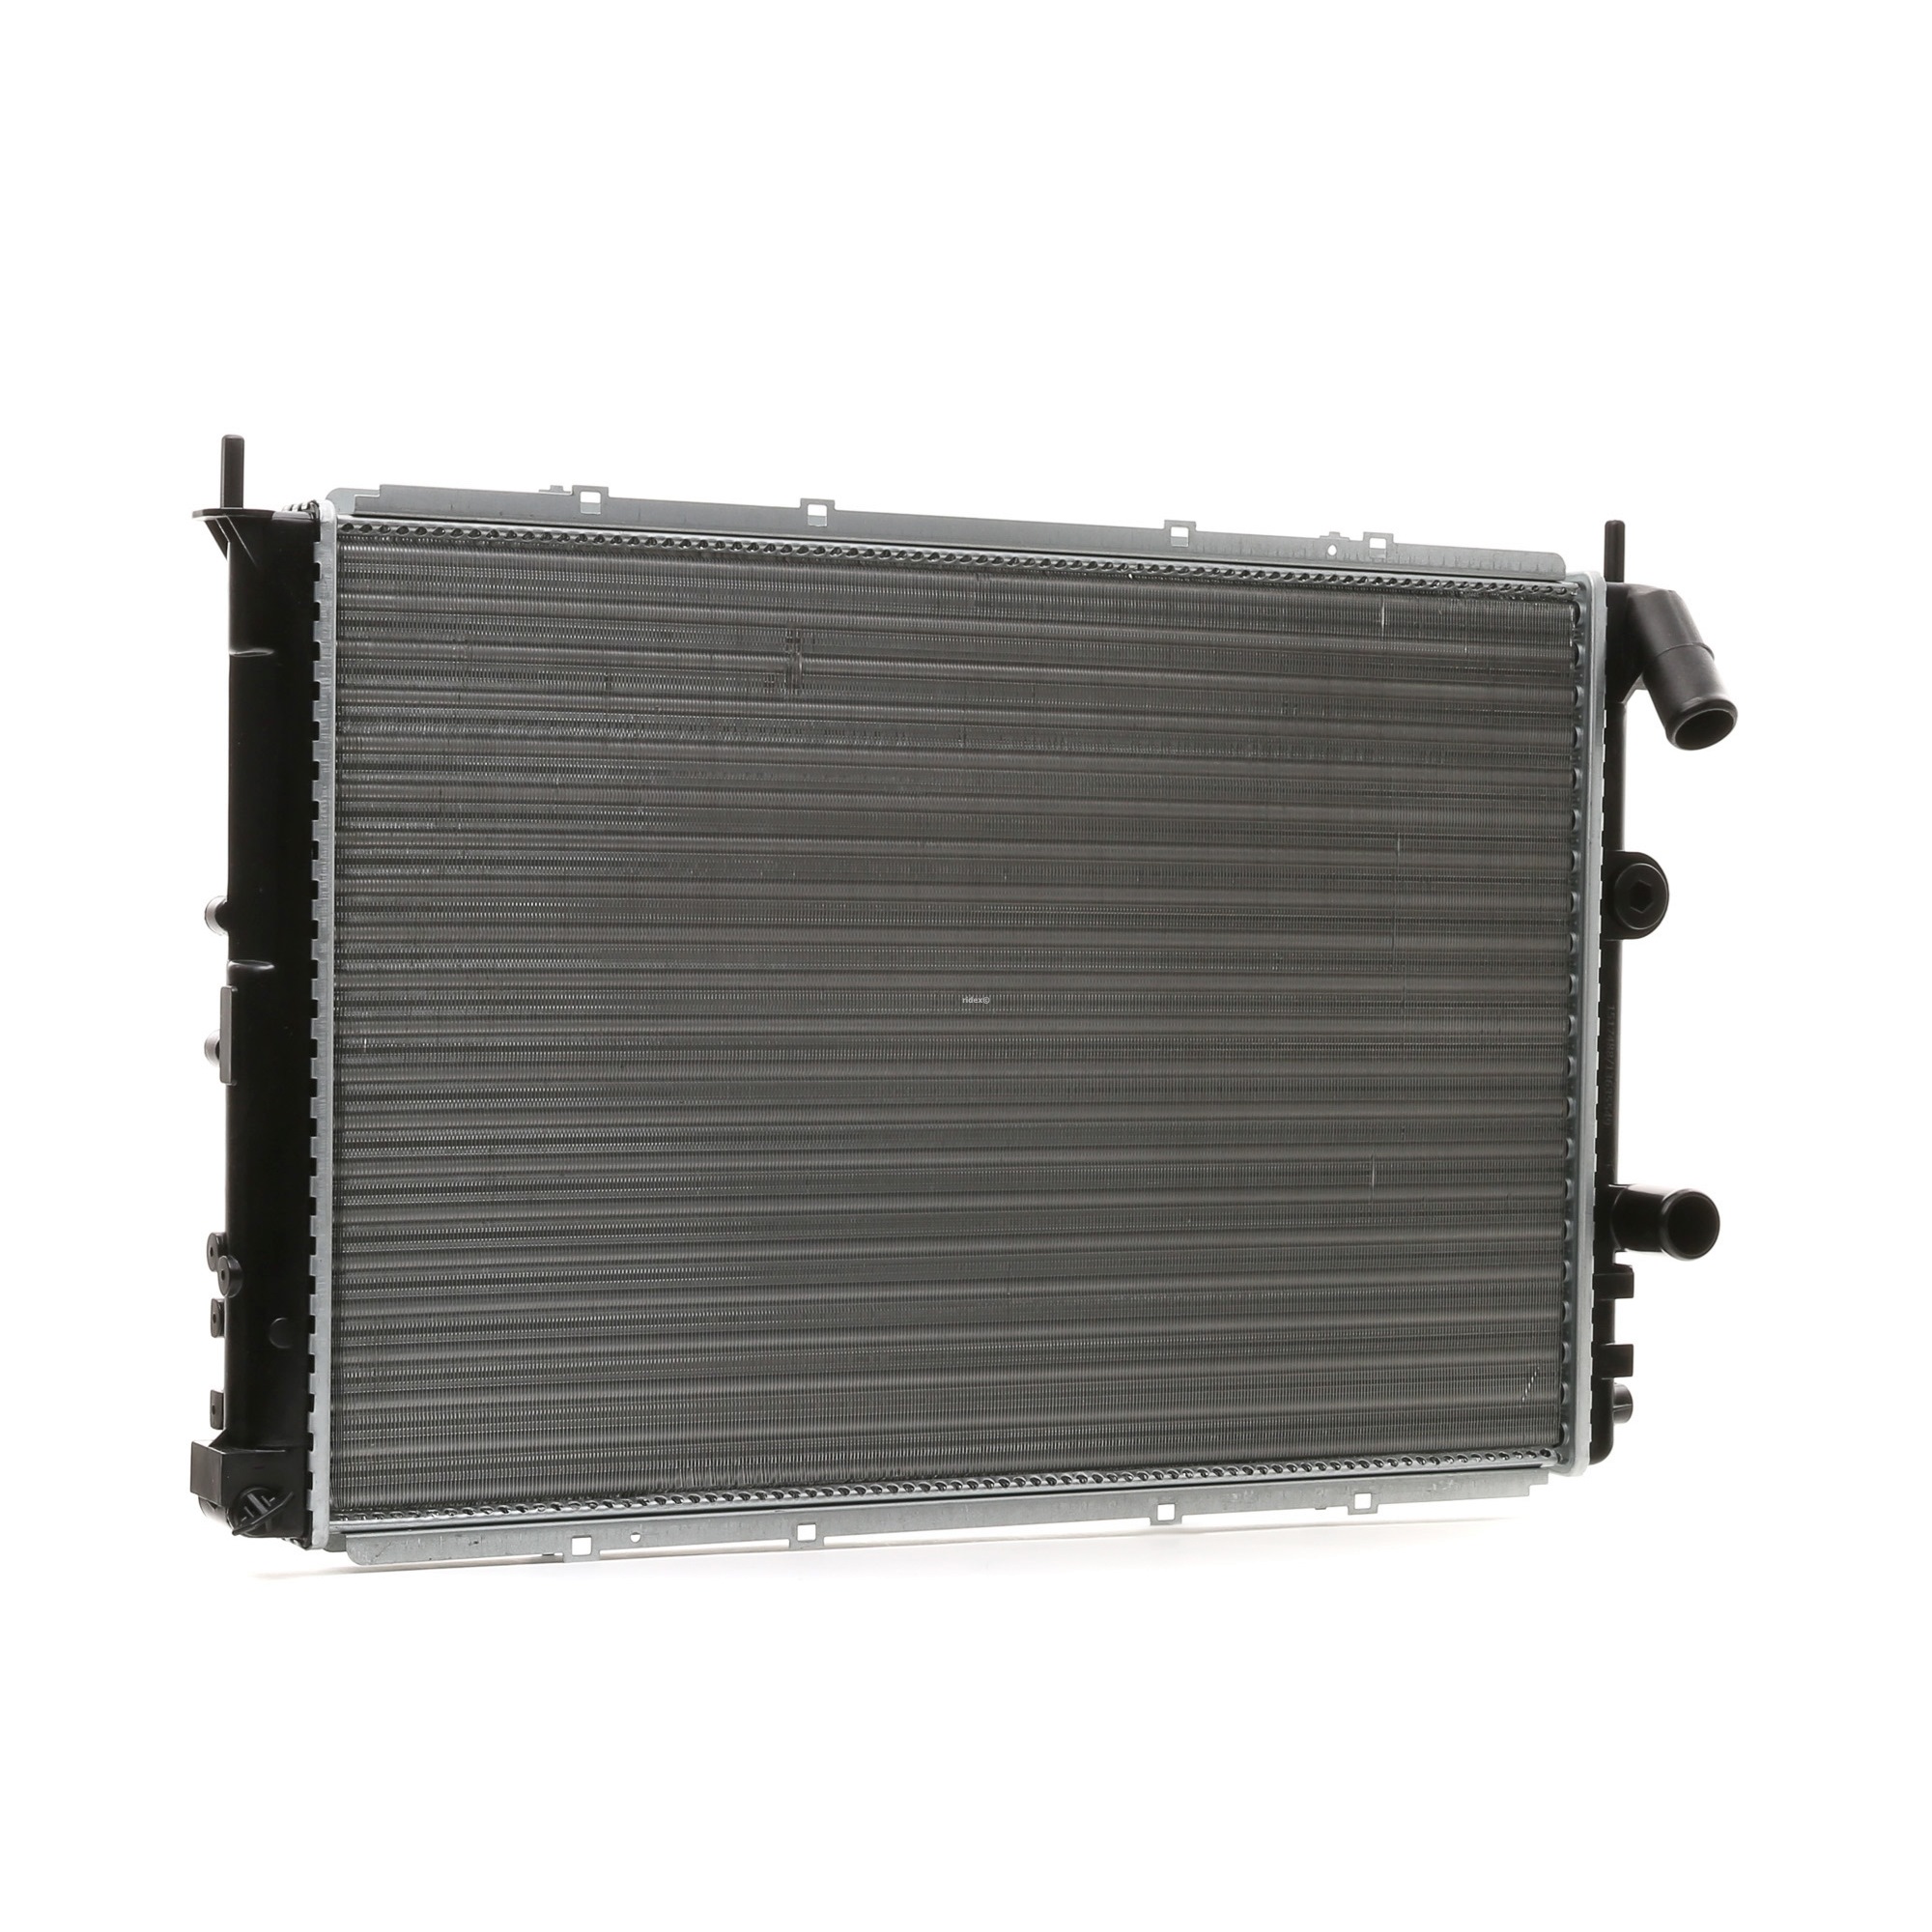 RIDEX 470R0750 Engine radiator Aluminium, Plastic, for vehicles with air conditioning, for vehicles with/without air conditioning, Manual Transmission